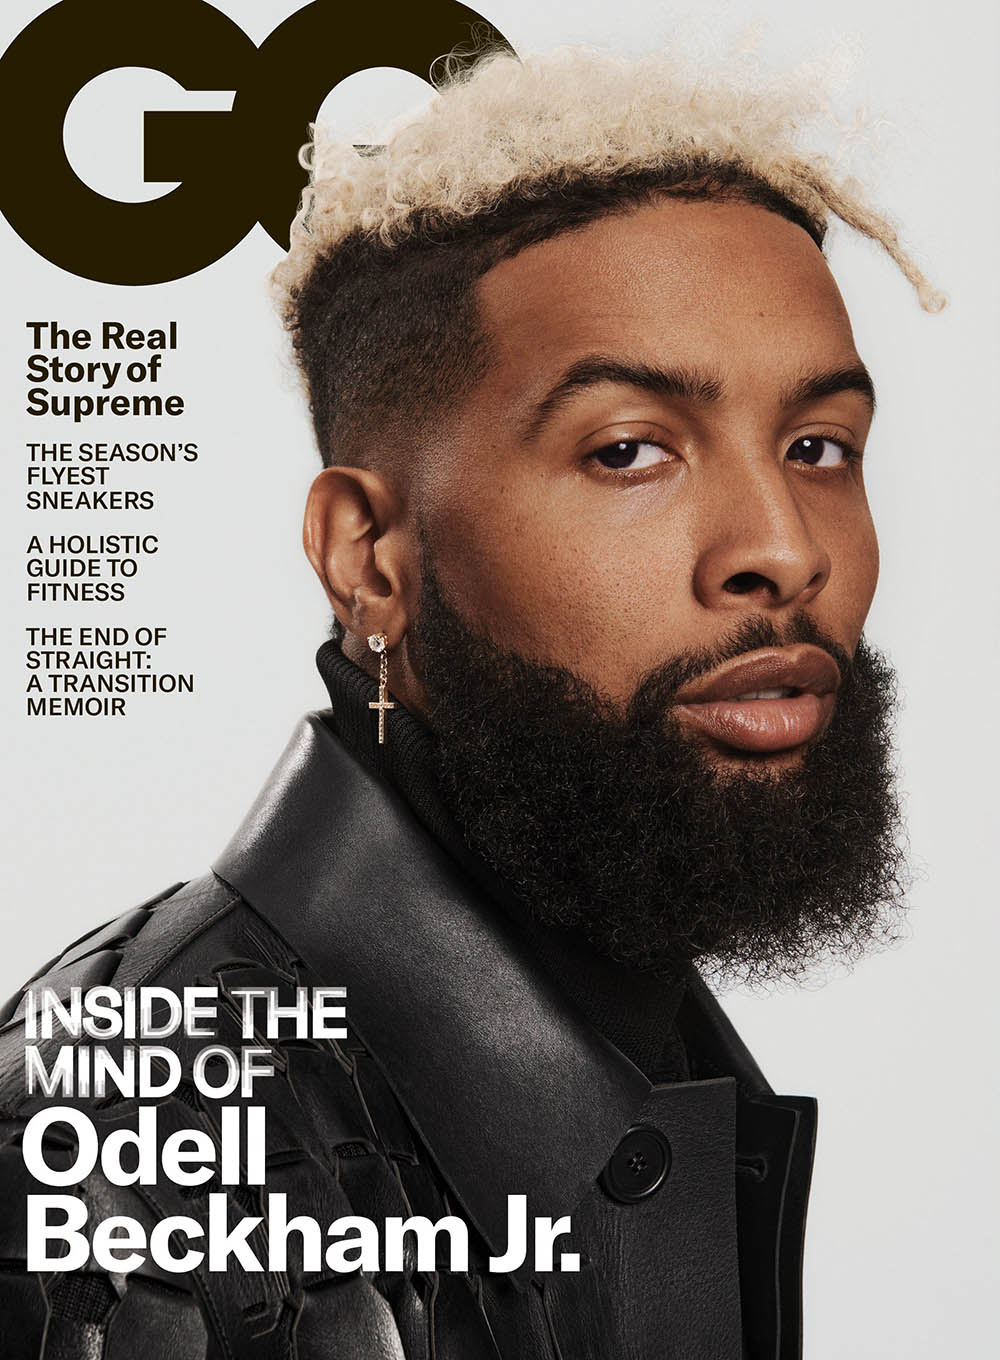 Odell Beckham Jr. covers GQ USA August 2019 by Paola Kudacki